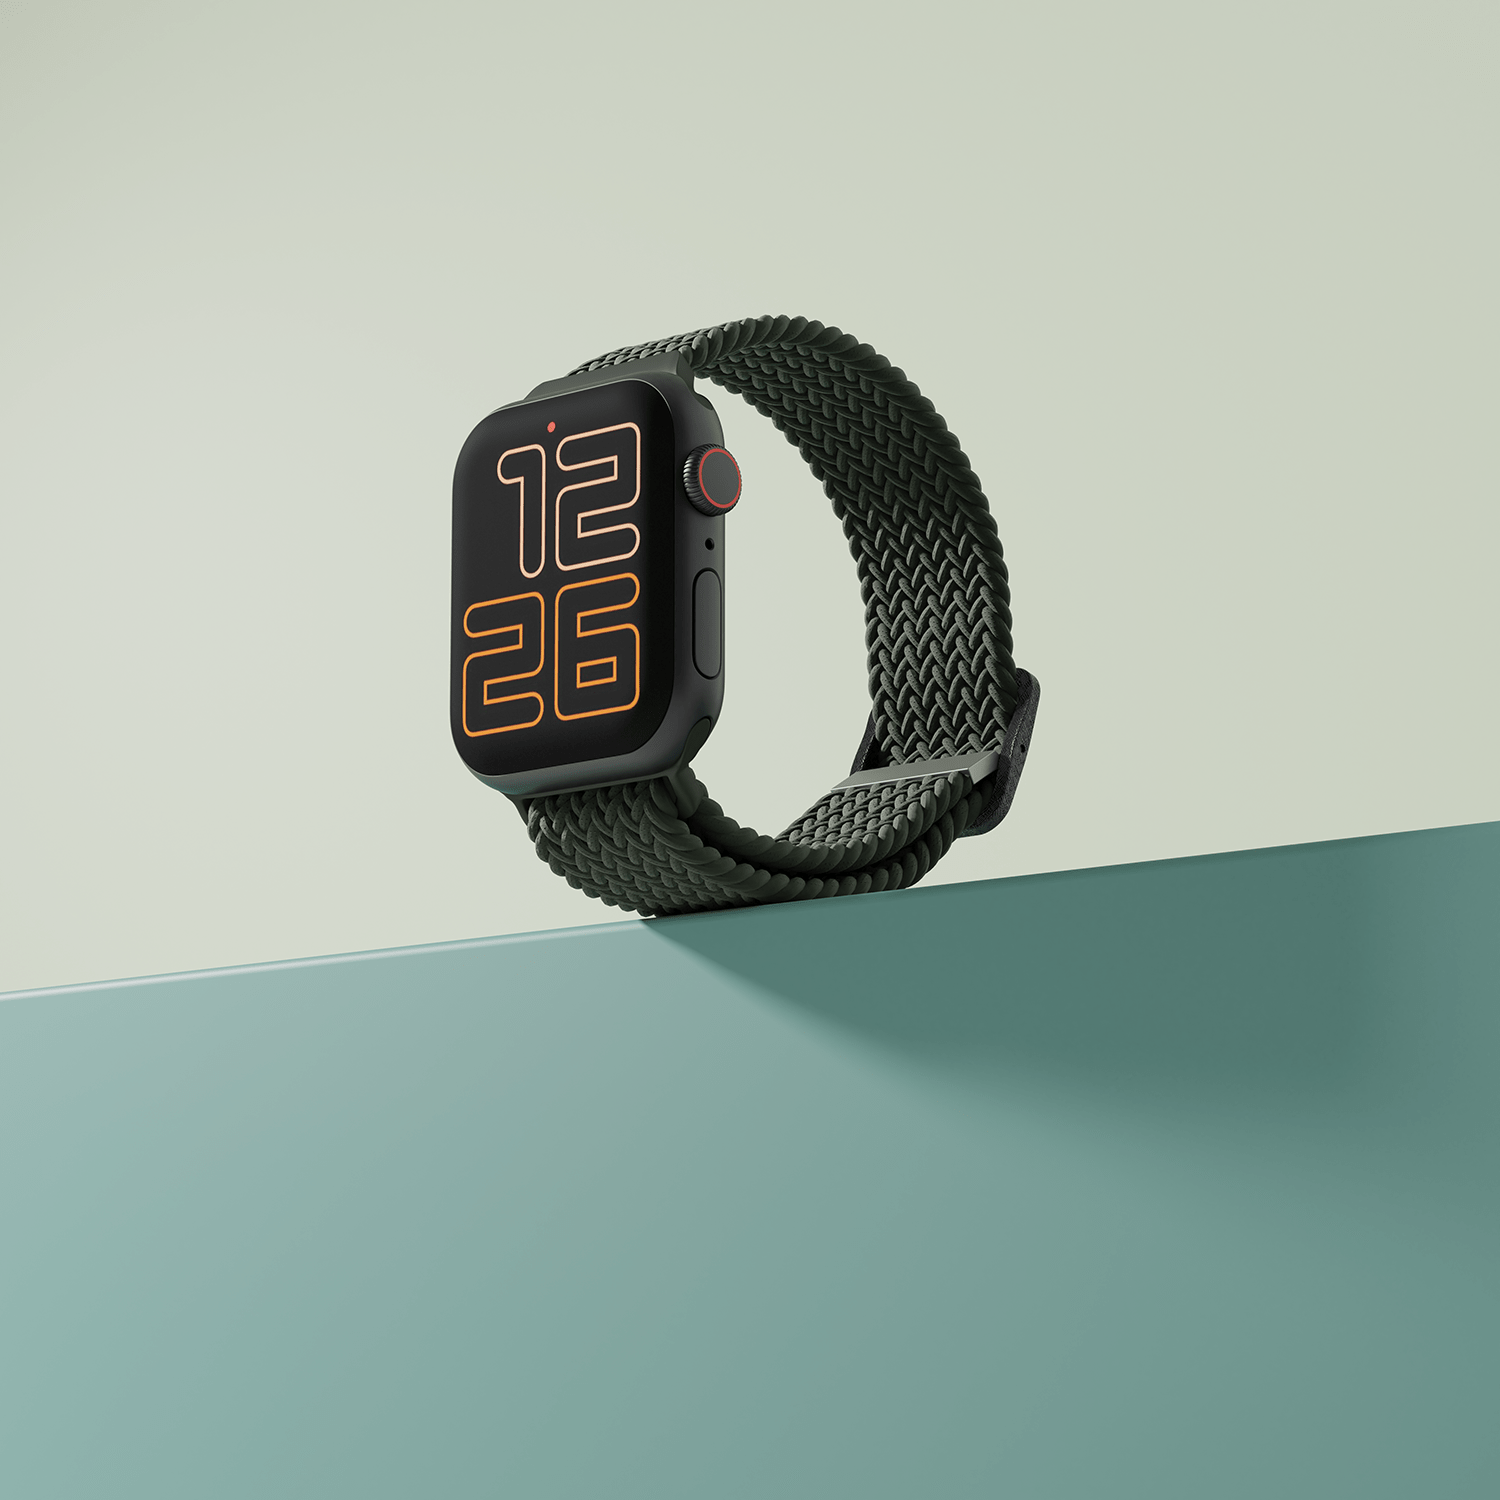 Smartwatch with green strap on multicolored background